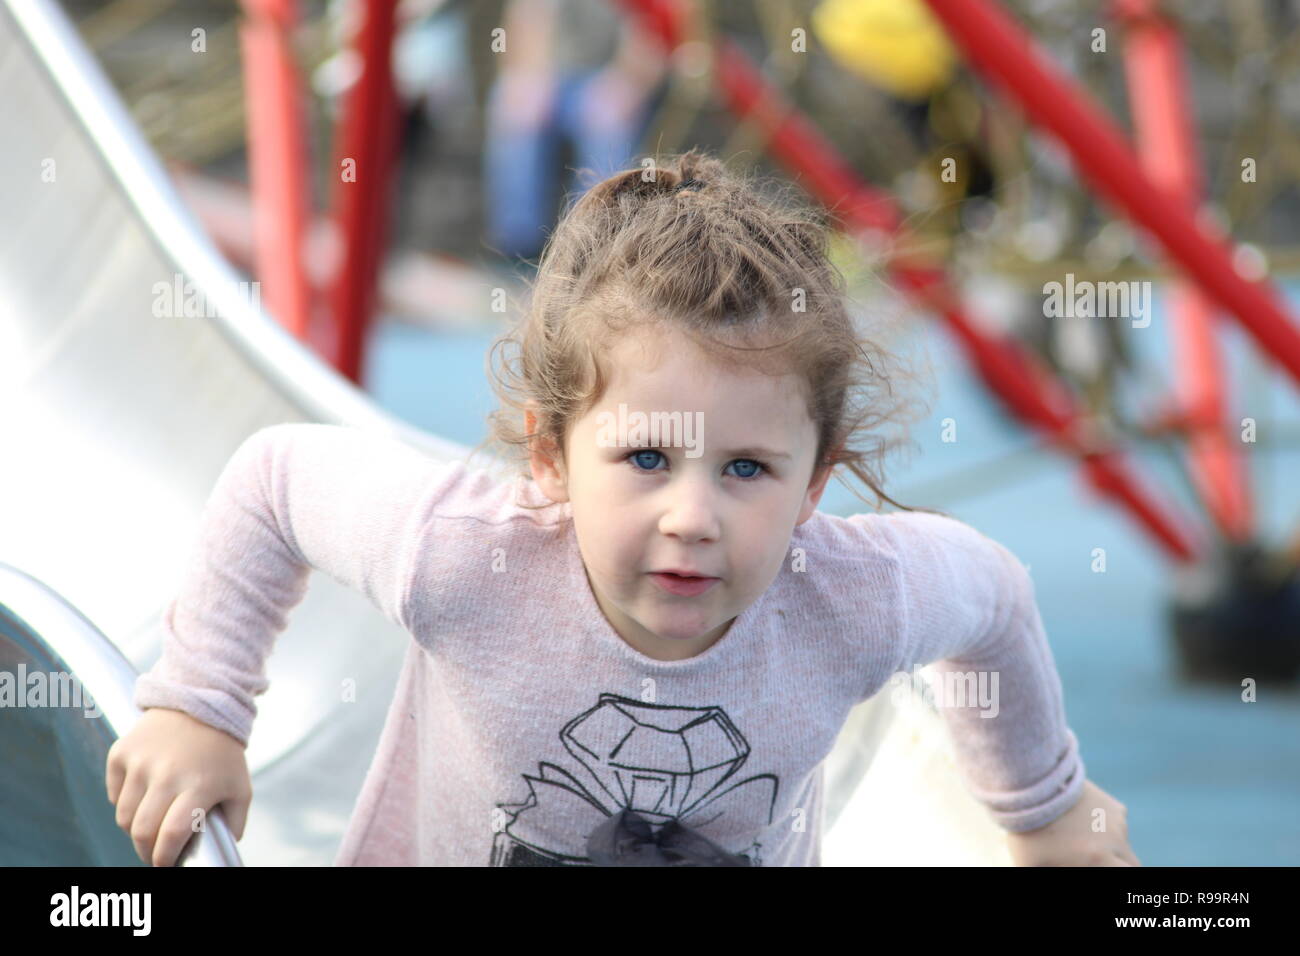 Young girl with brown hair and blue eyes getting up of a slide in a park in skegness Stock Photo